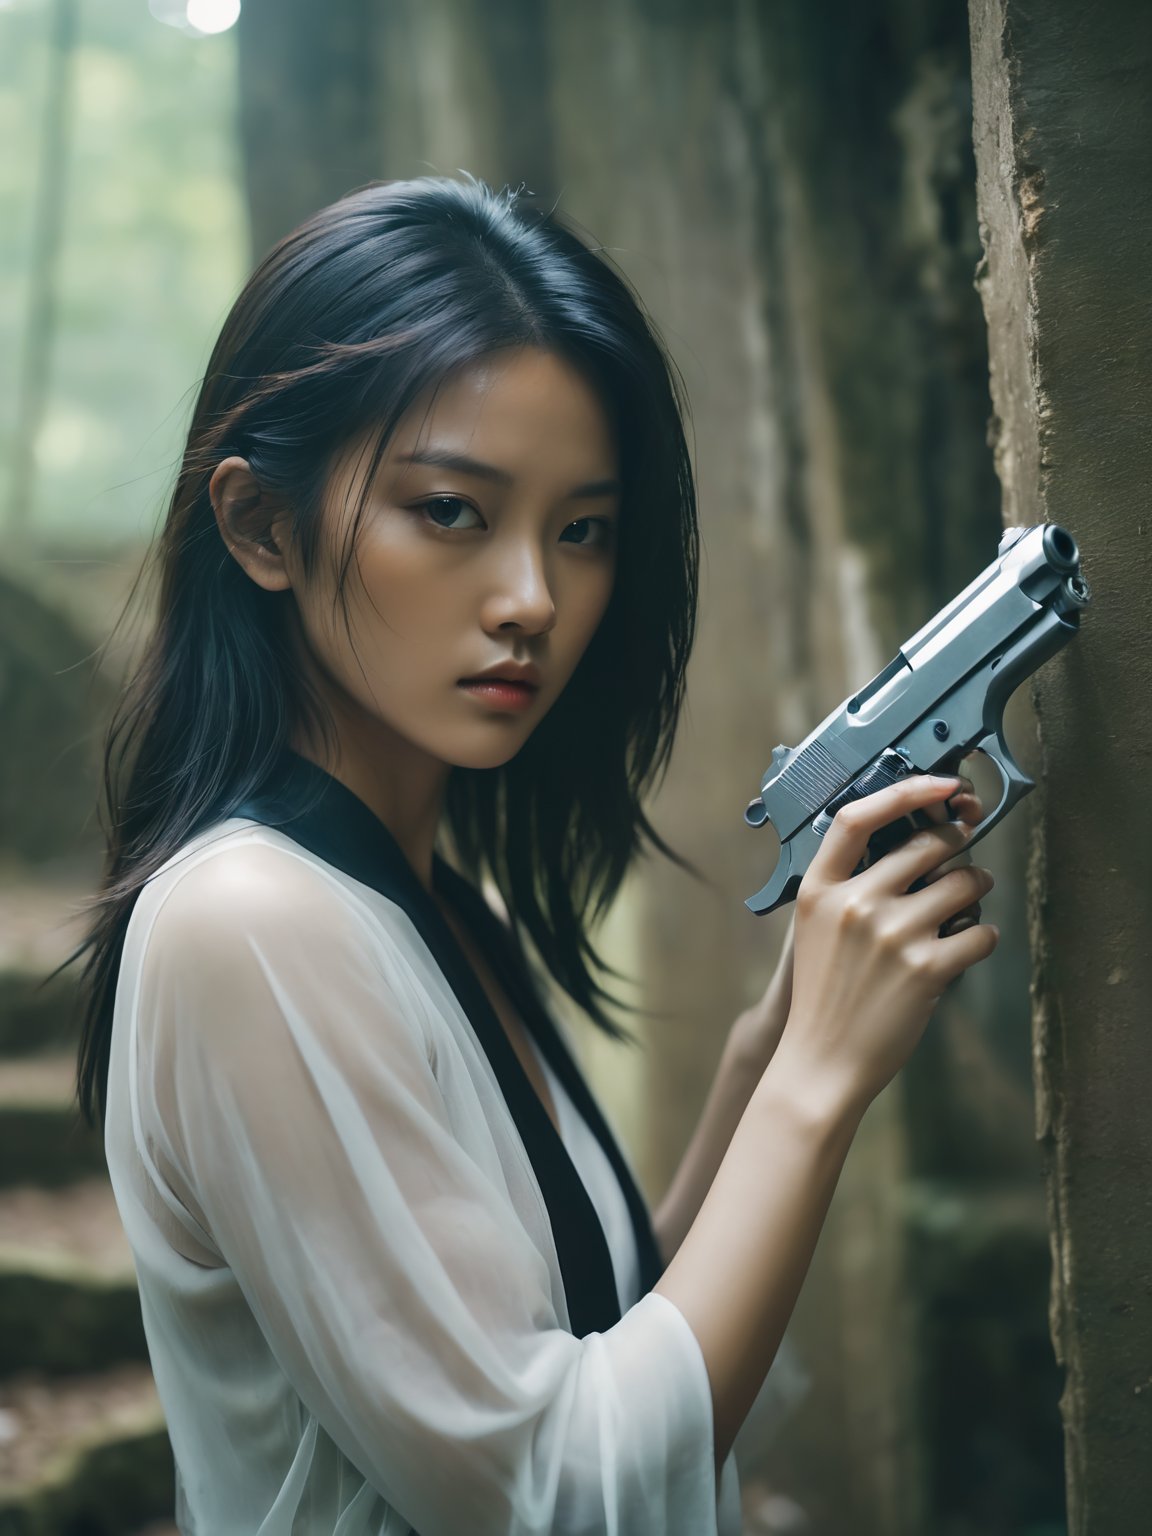 Holding a Handgun,subterranean crystal palace,endangered species,contemplative atmosphere,mysterious mood,Beast,Monster,headshot,Slashing with talons,windswept hair sexy asian young woman,film grain texture,analog photography aesthetic,visual storytelling,dynamic composition,looking at viewer,eye contact,